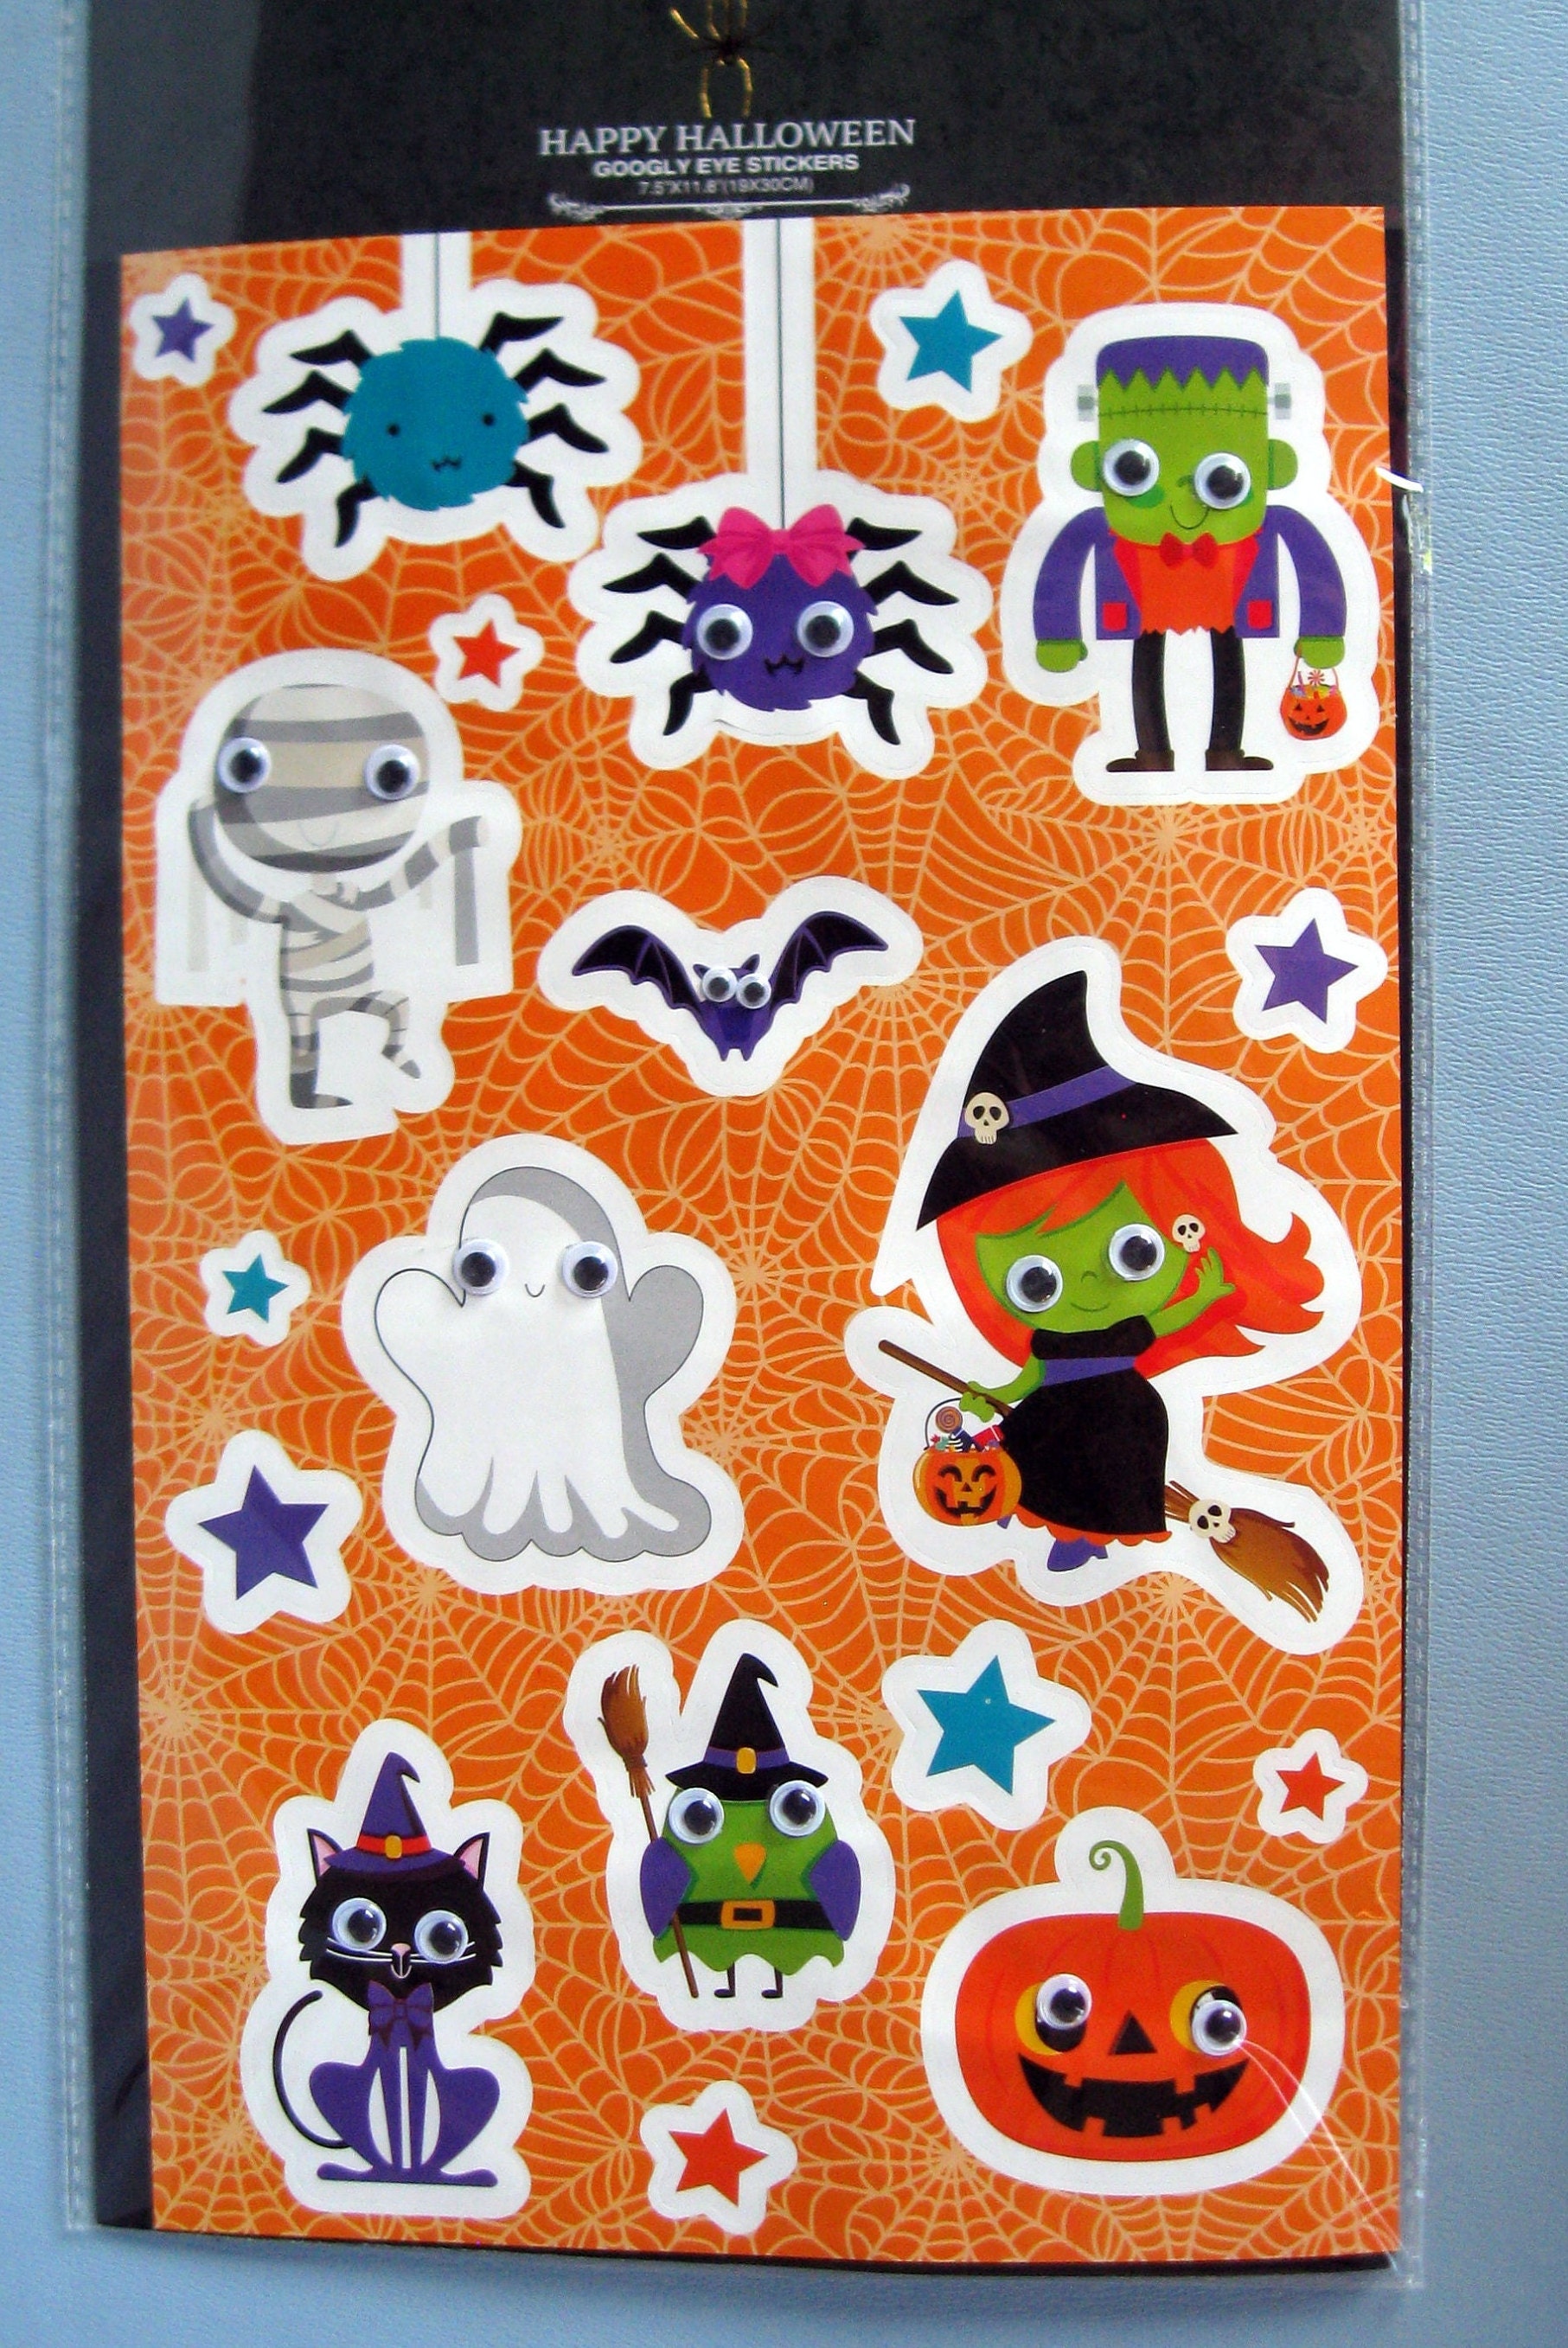 HALLOWEEN STICKERS large Size/ Googly Eye Halloween Stickers: Witch,  Frankenstein, Cat, Ghost, Spider/ Card Making, Party Favors 